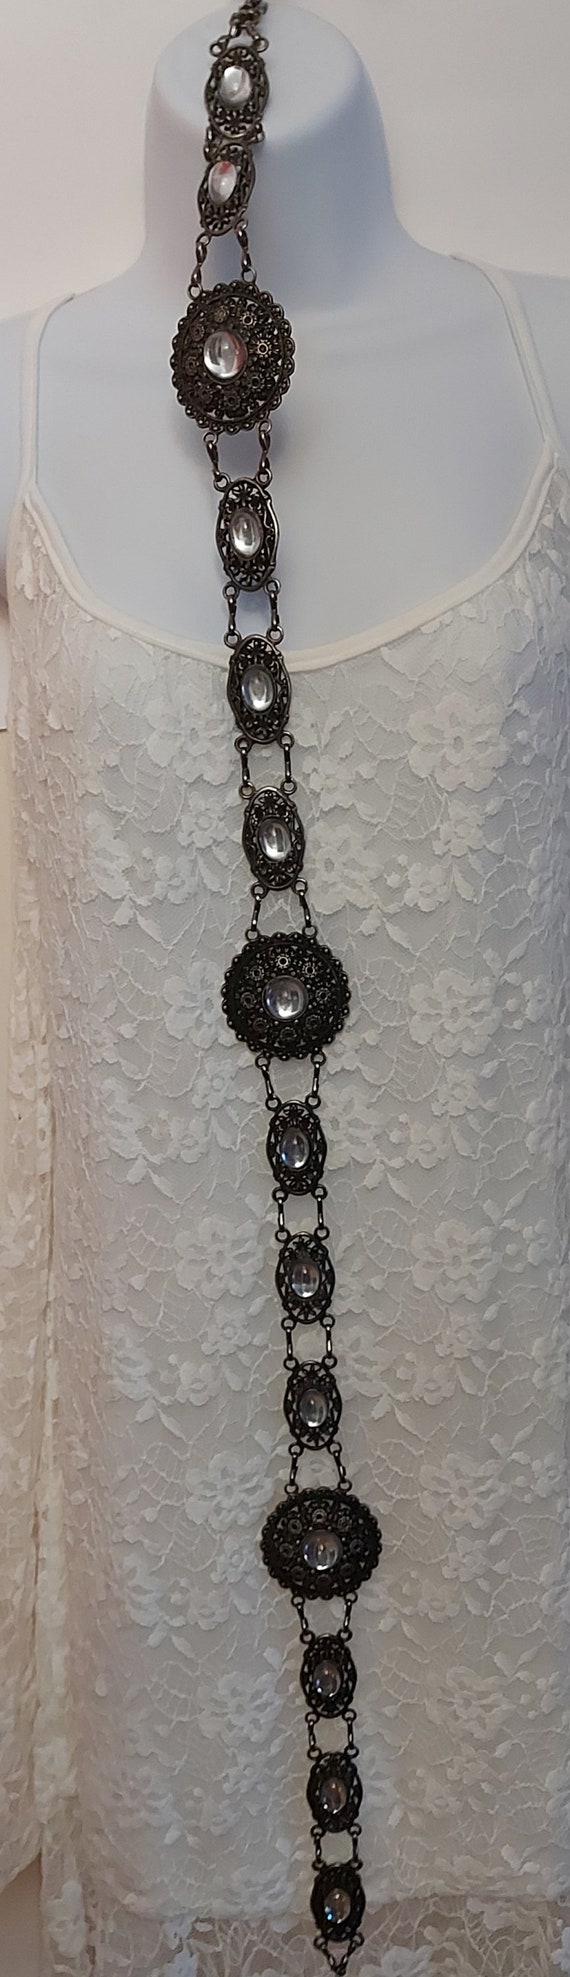 Metal Conch Chain Belt - image 4